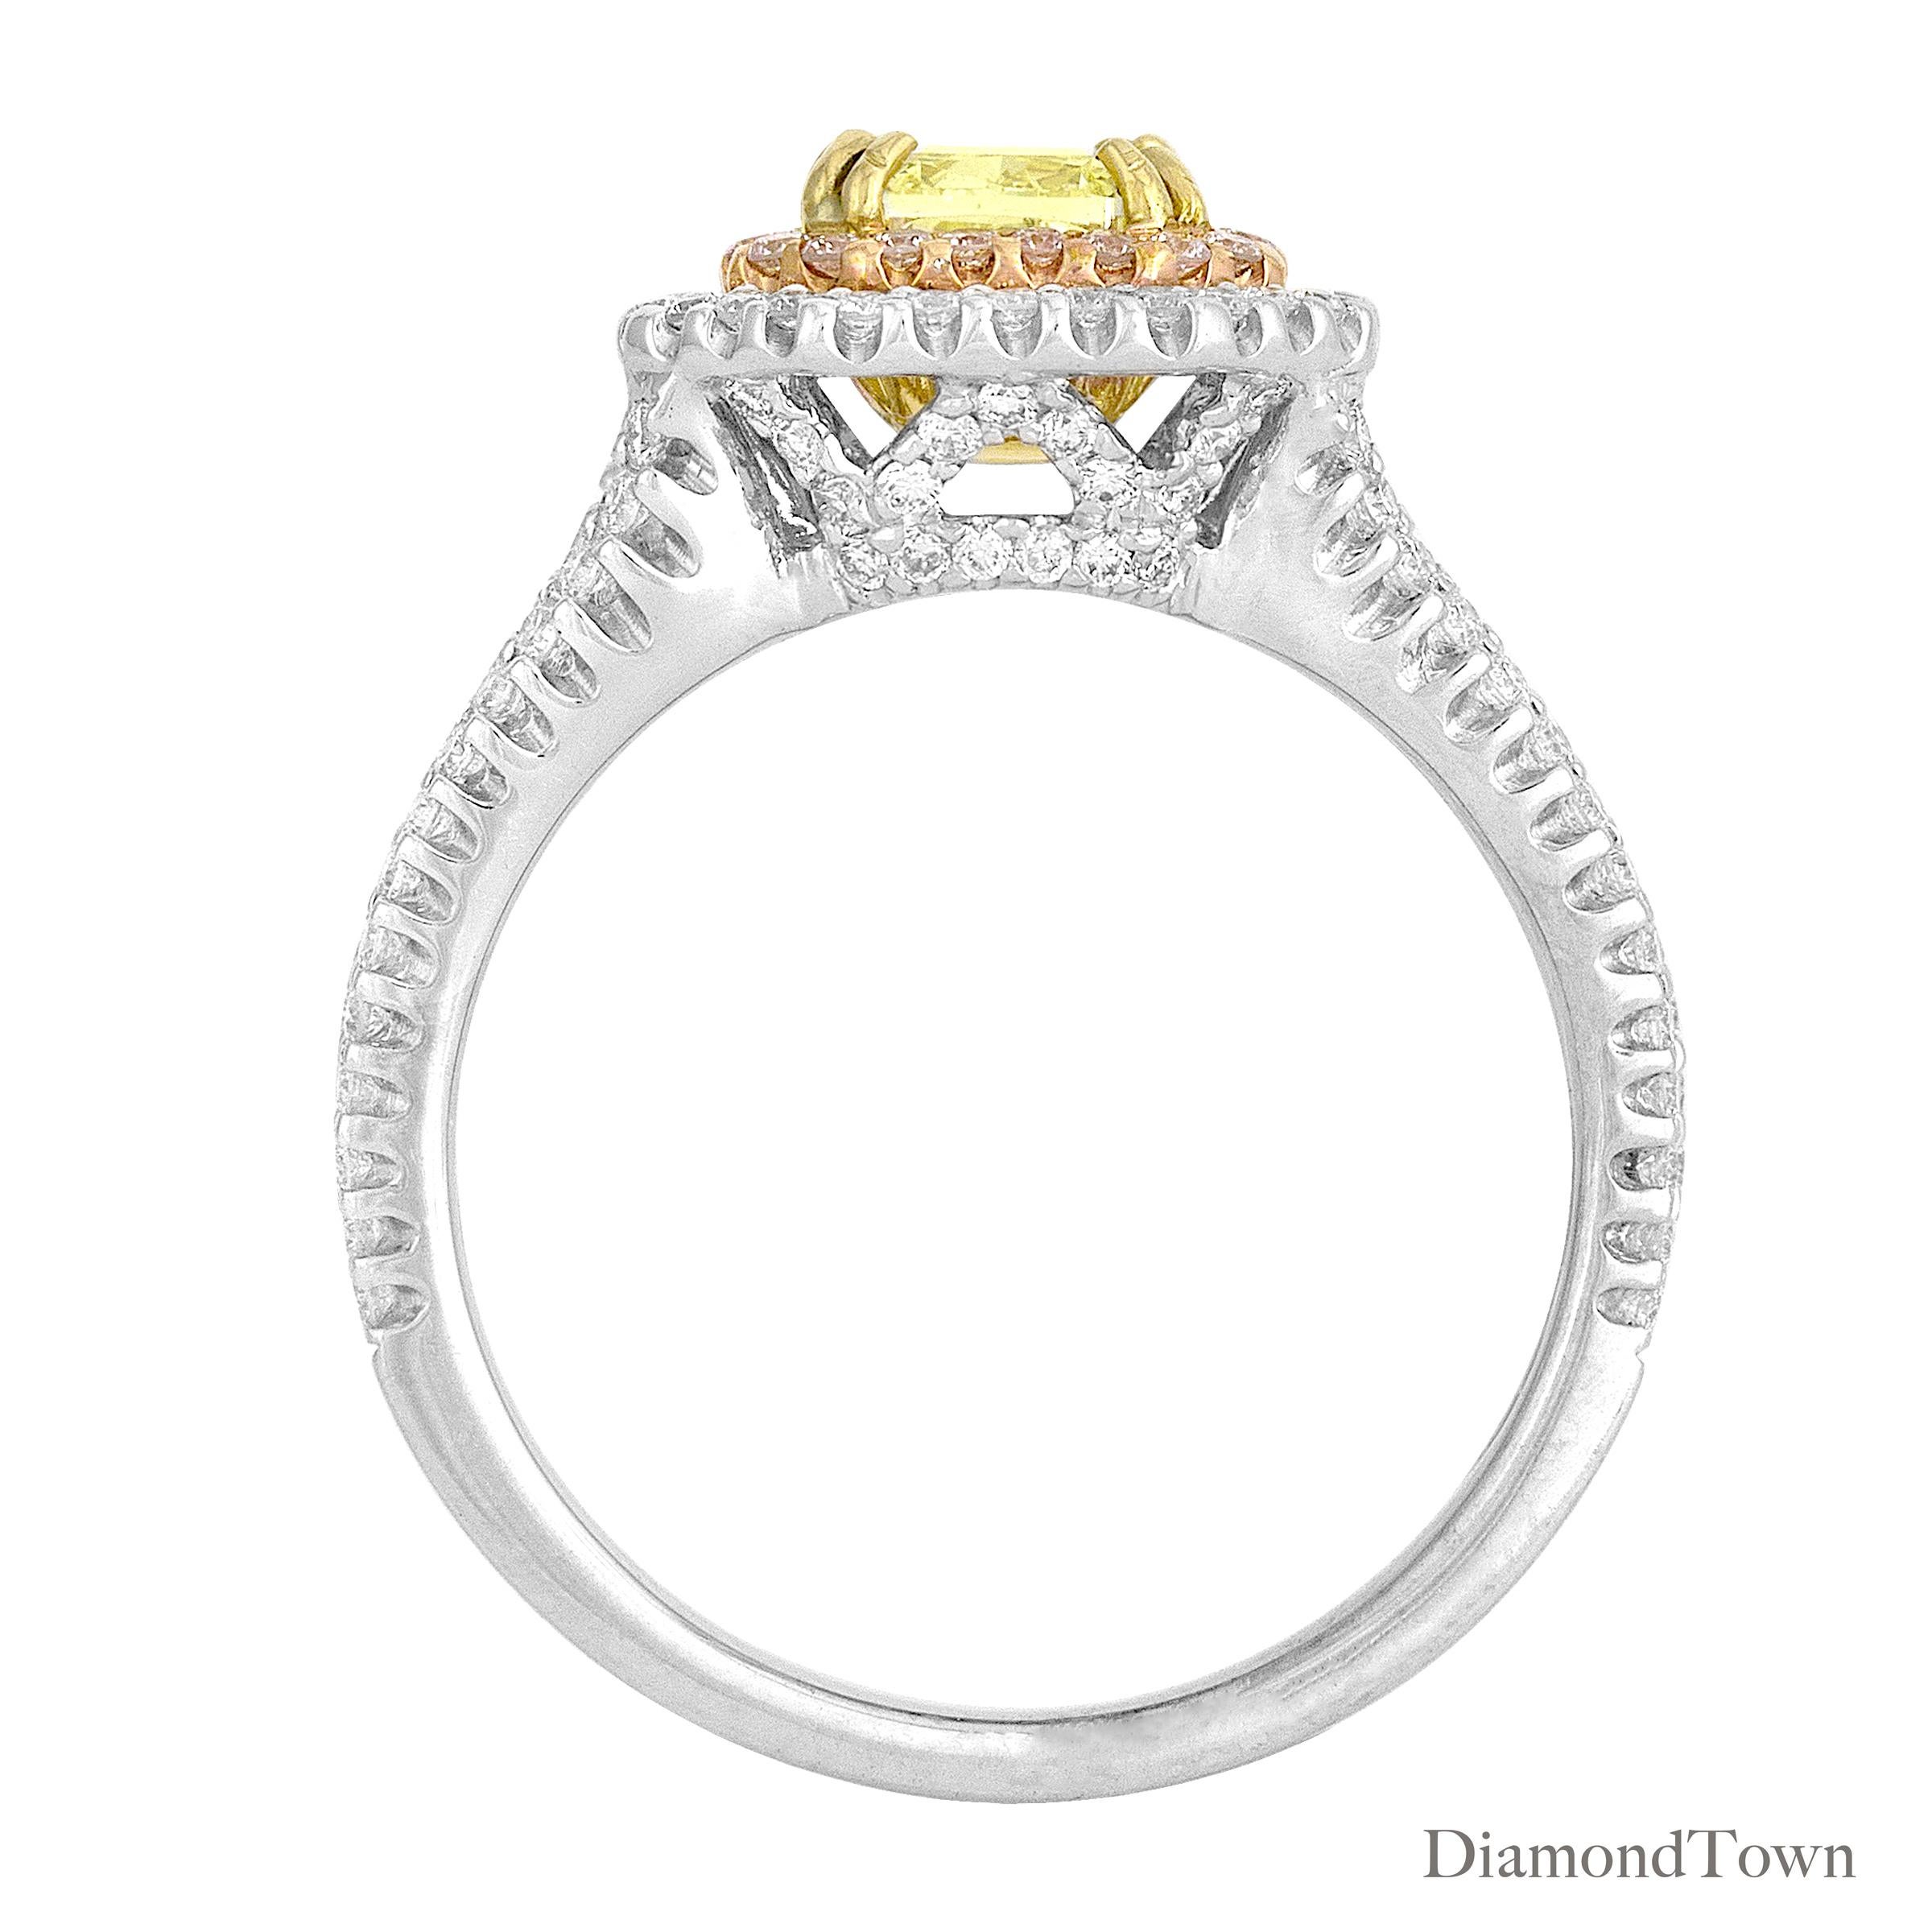 (DiamondTown) This gorgeous ring has a GIA Certified Oval Cut Natural Fancy Yellow center measuring 1.00 carats, surrounded by a double halo of round white diamonds. Additional diamonds decorate the three-track side shank, and a detailed under